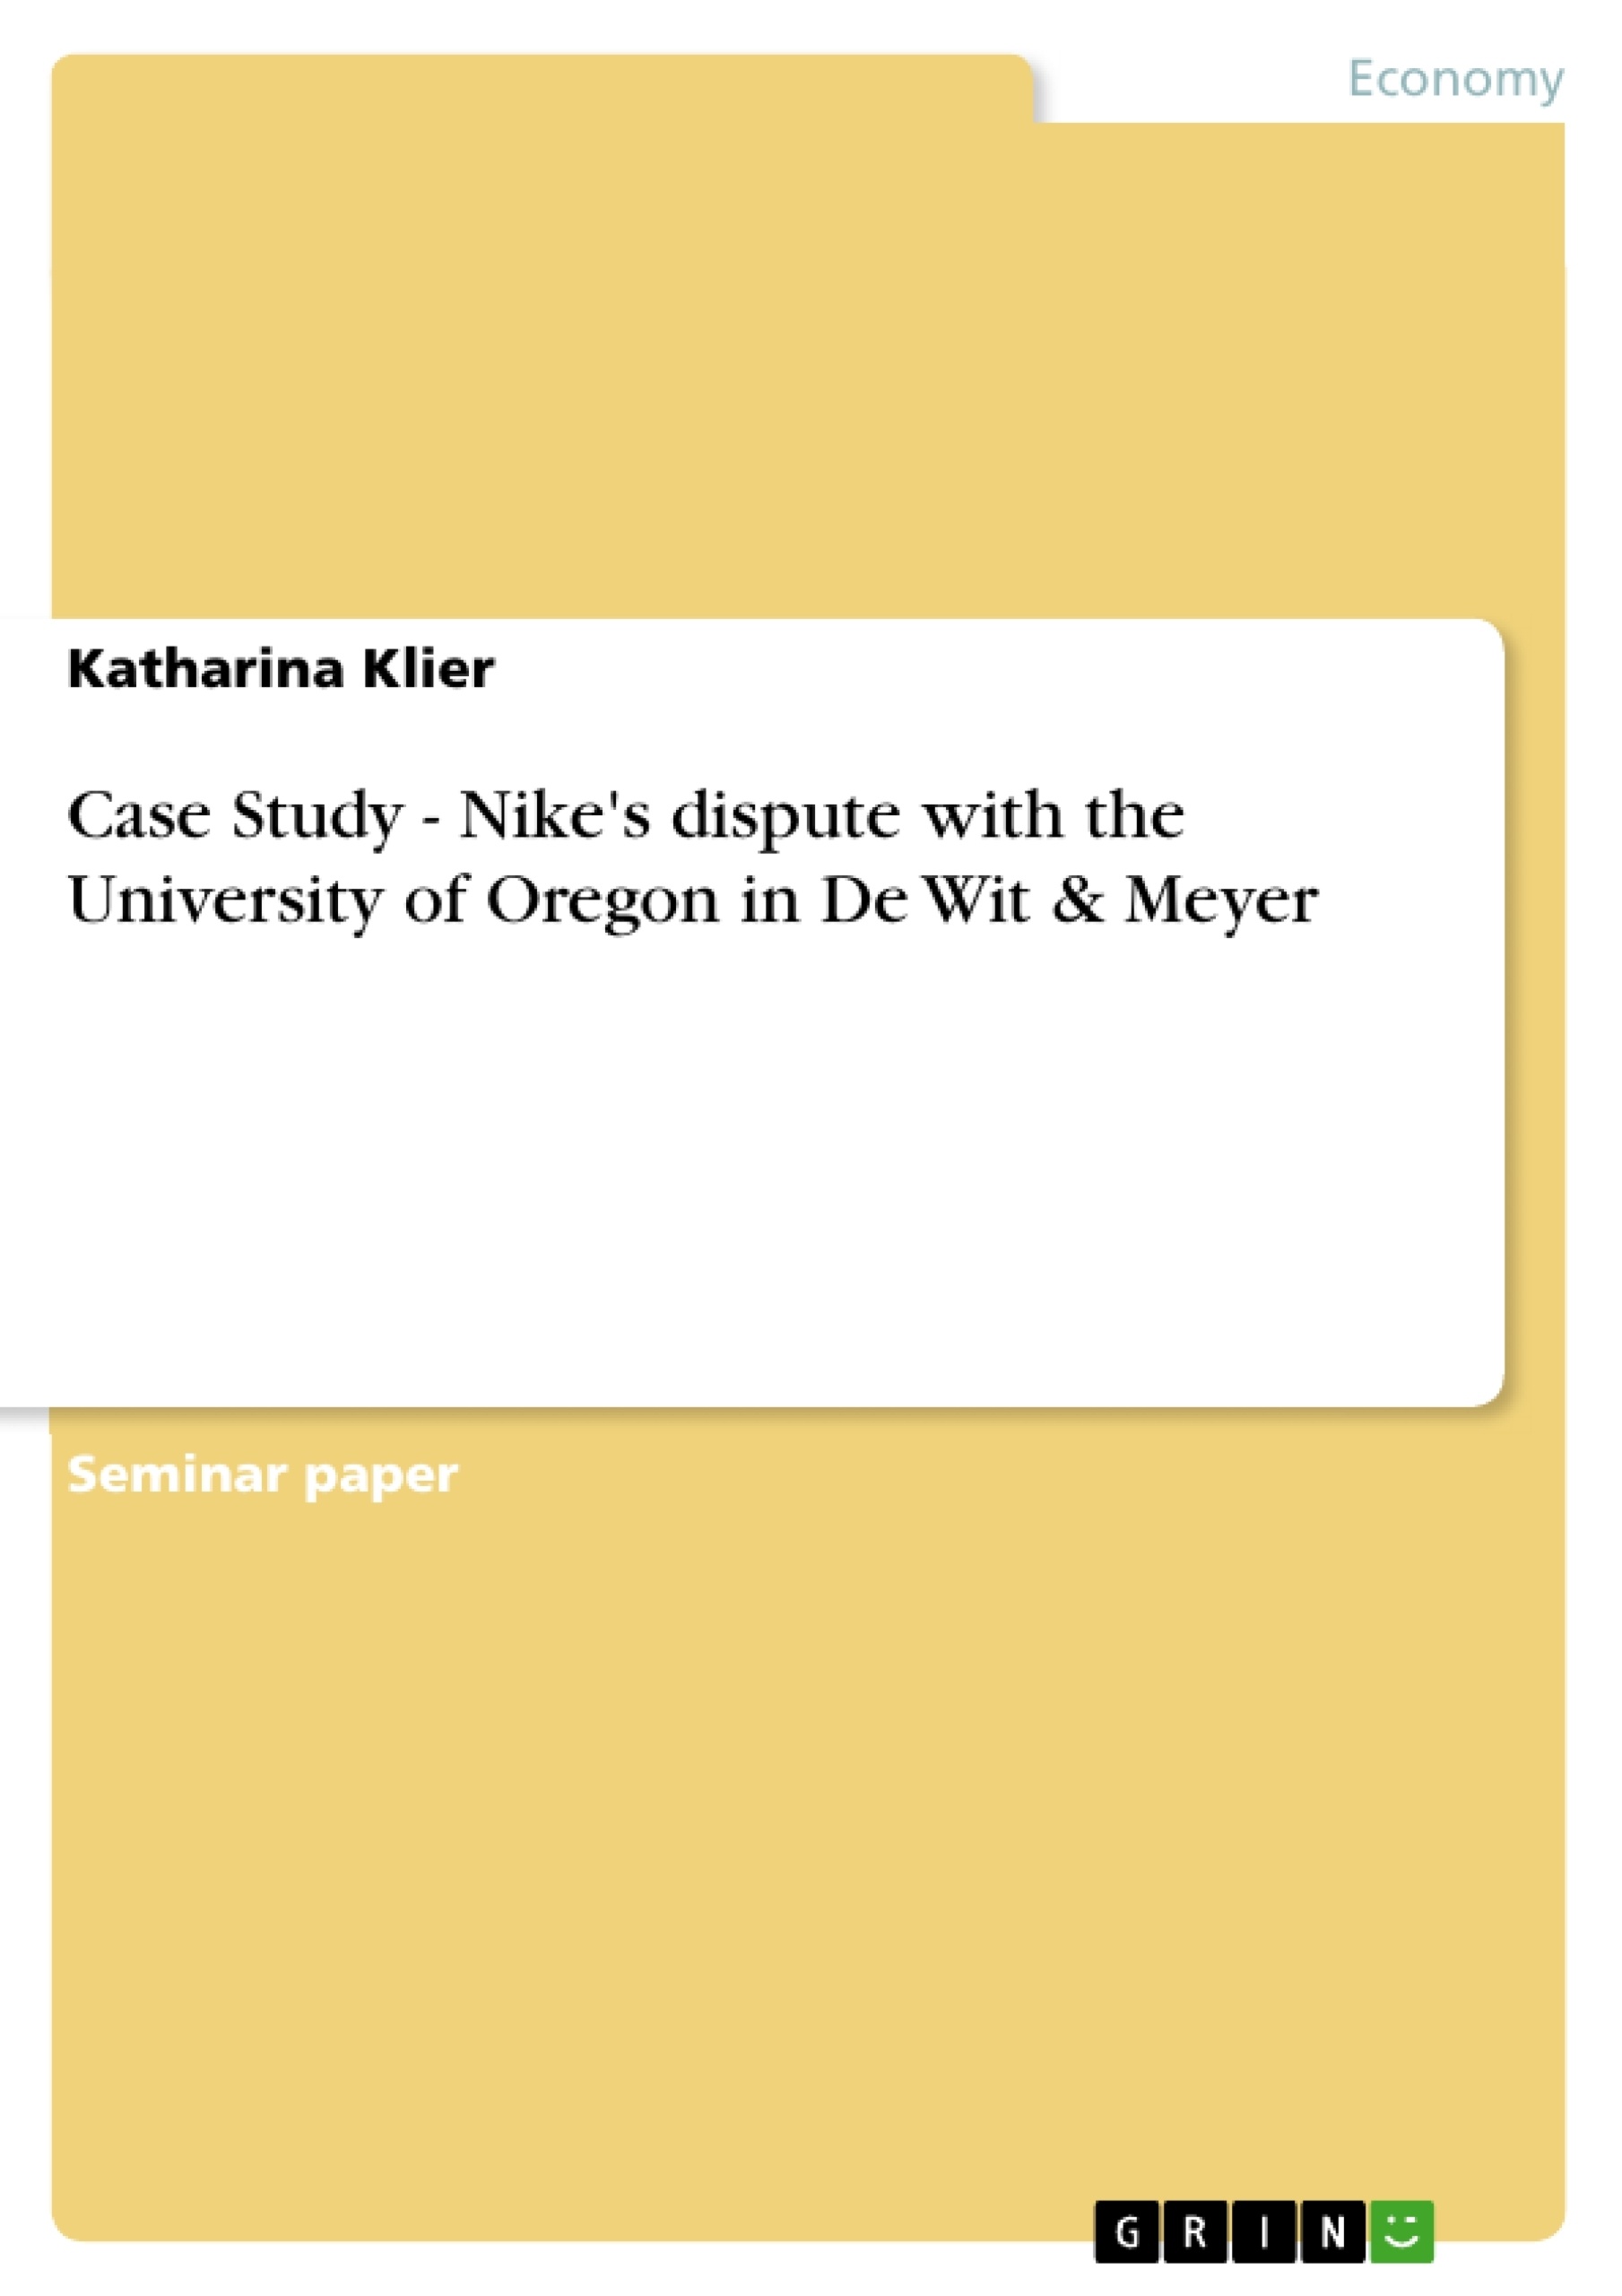 Title: Case Study - Nike's dispute with the University of Oregon in De Wit & Meyer